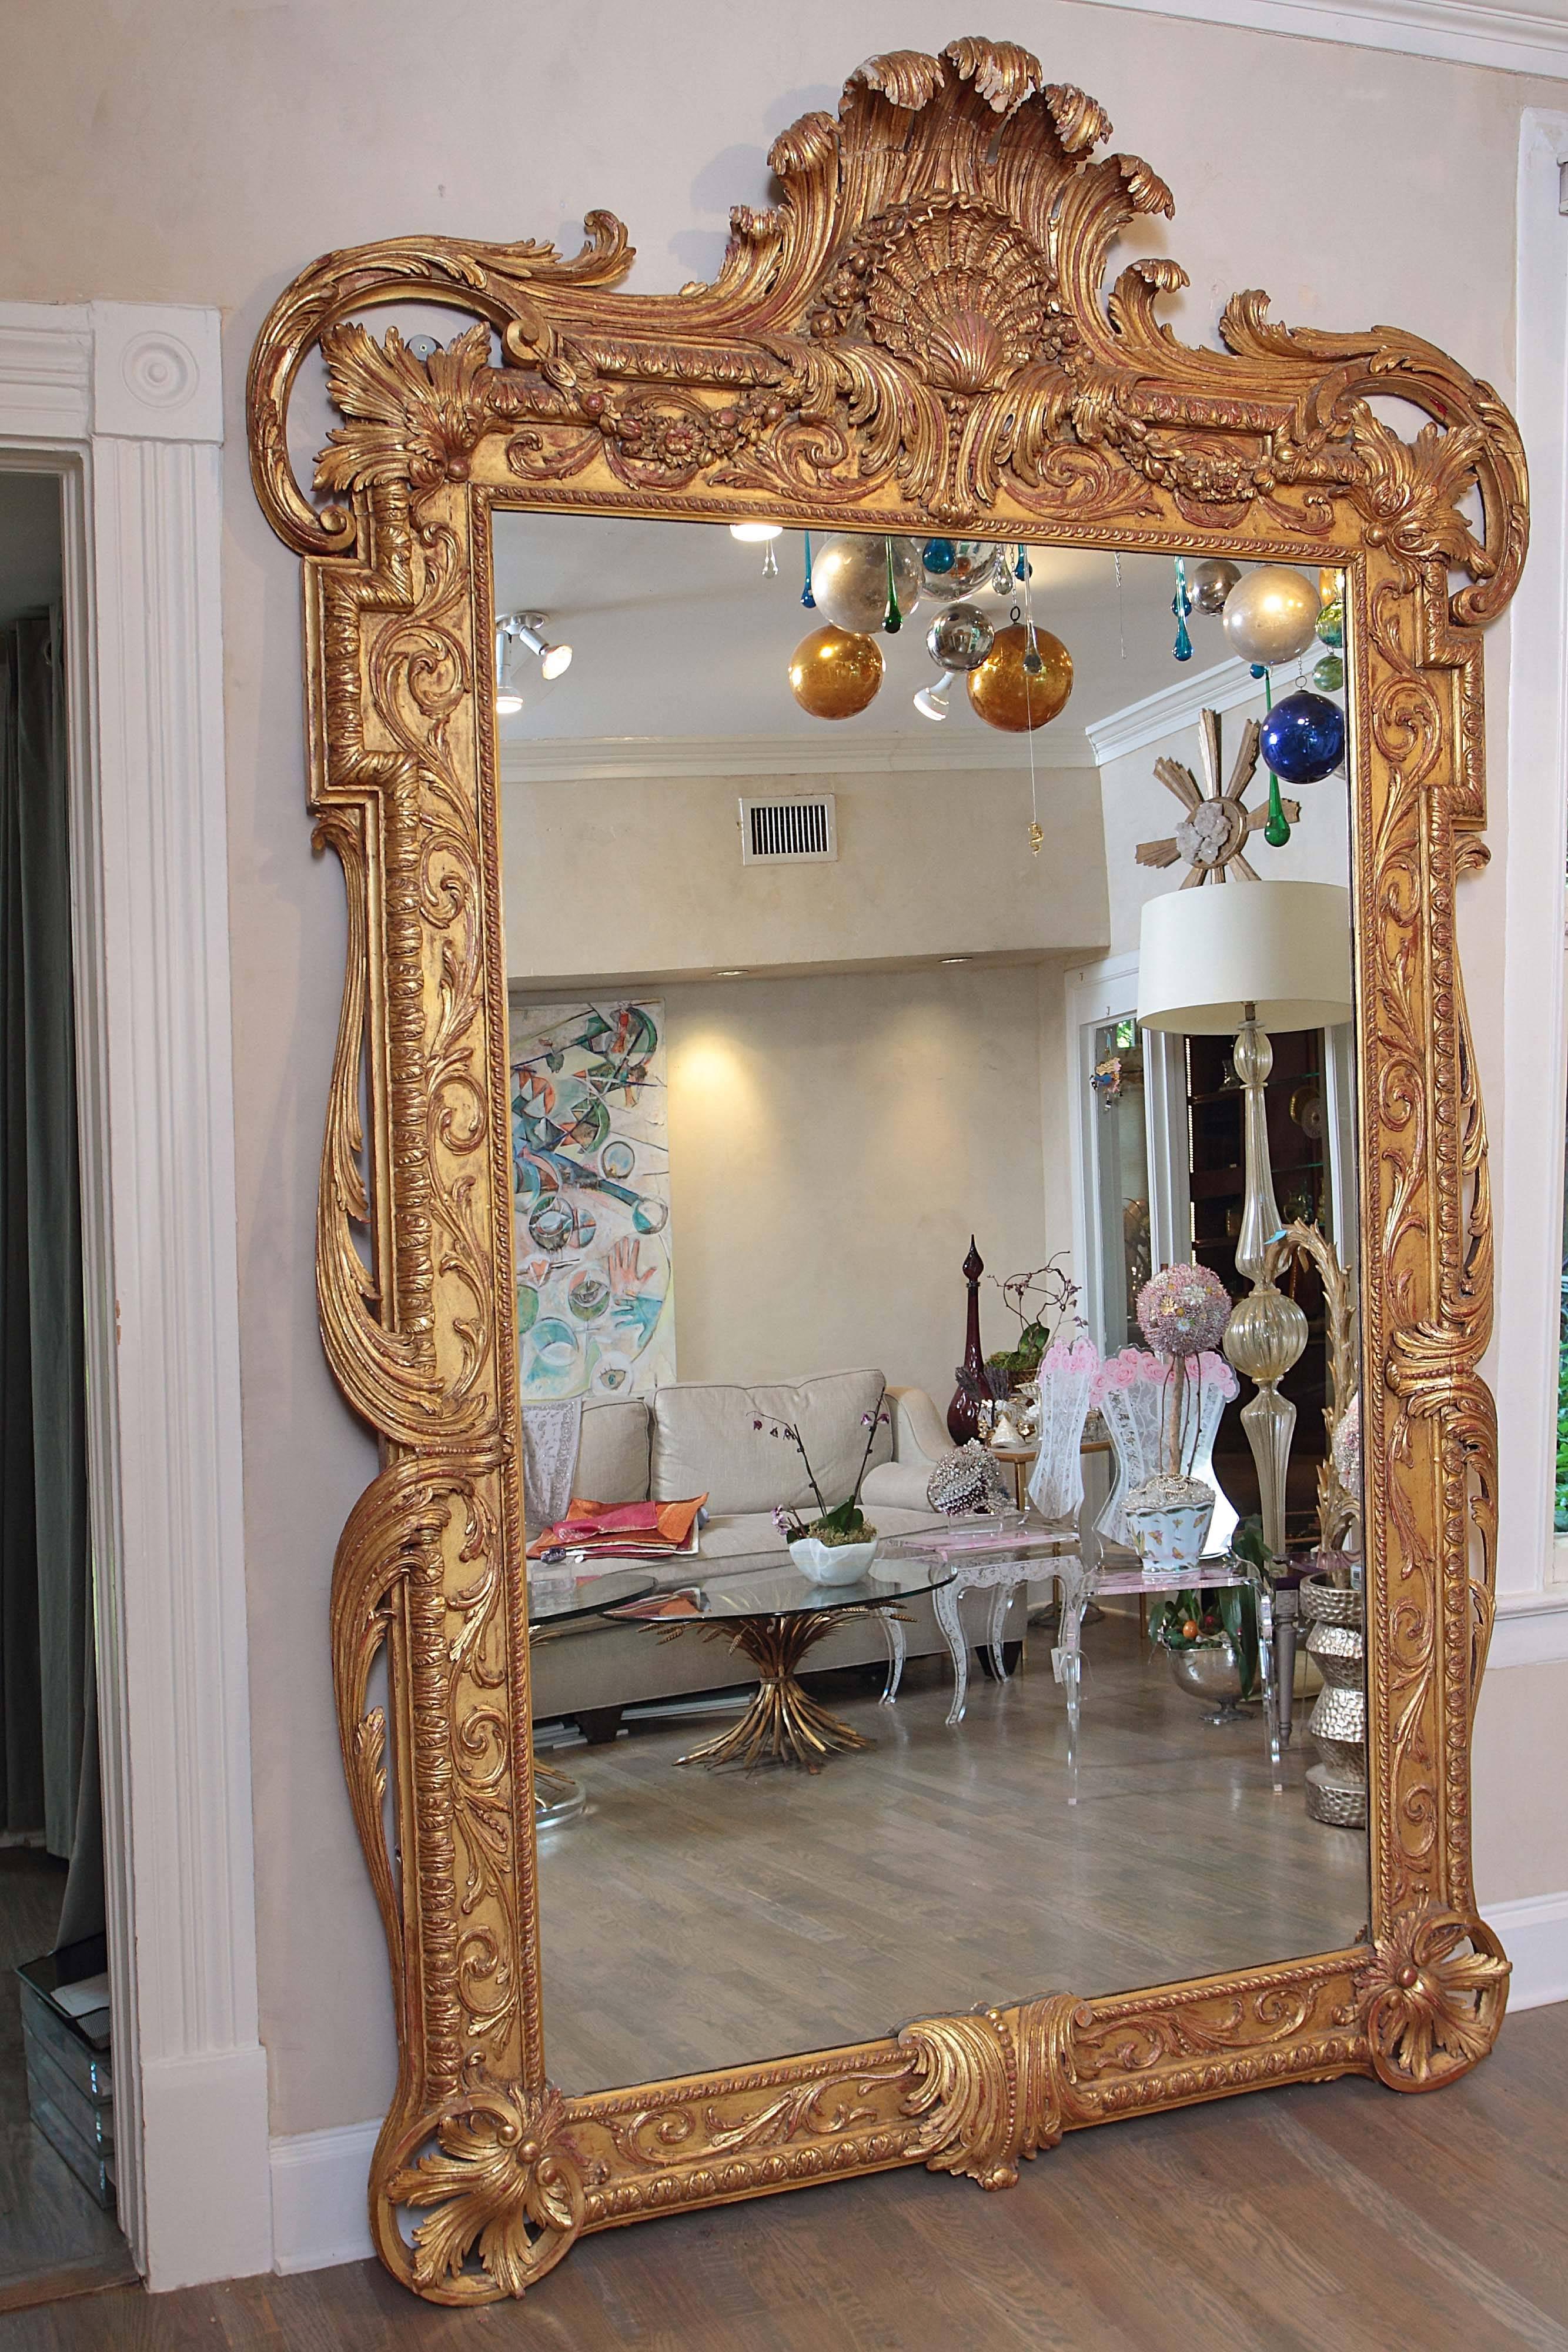 Extra large full length gold Rococo style dress mirror. 

Magnificent in size, this gold Rococo mirror has an ornate carved frame. This superb quality large gold mirror has a sturdy Stand so the angle of the glass can be adjusted. A full length